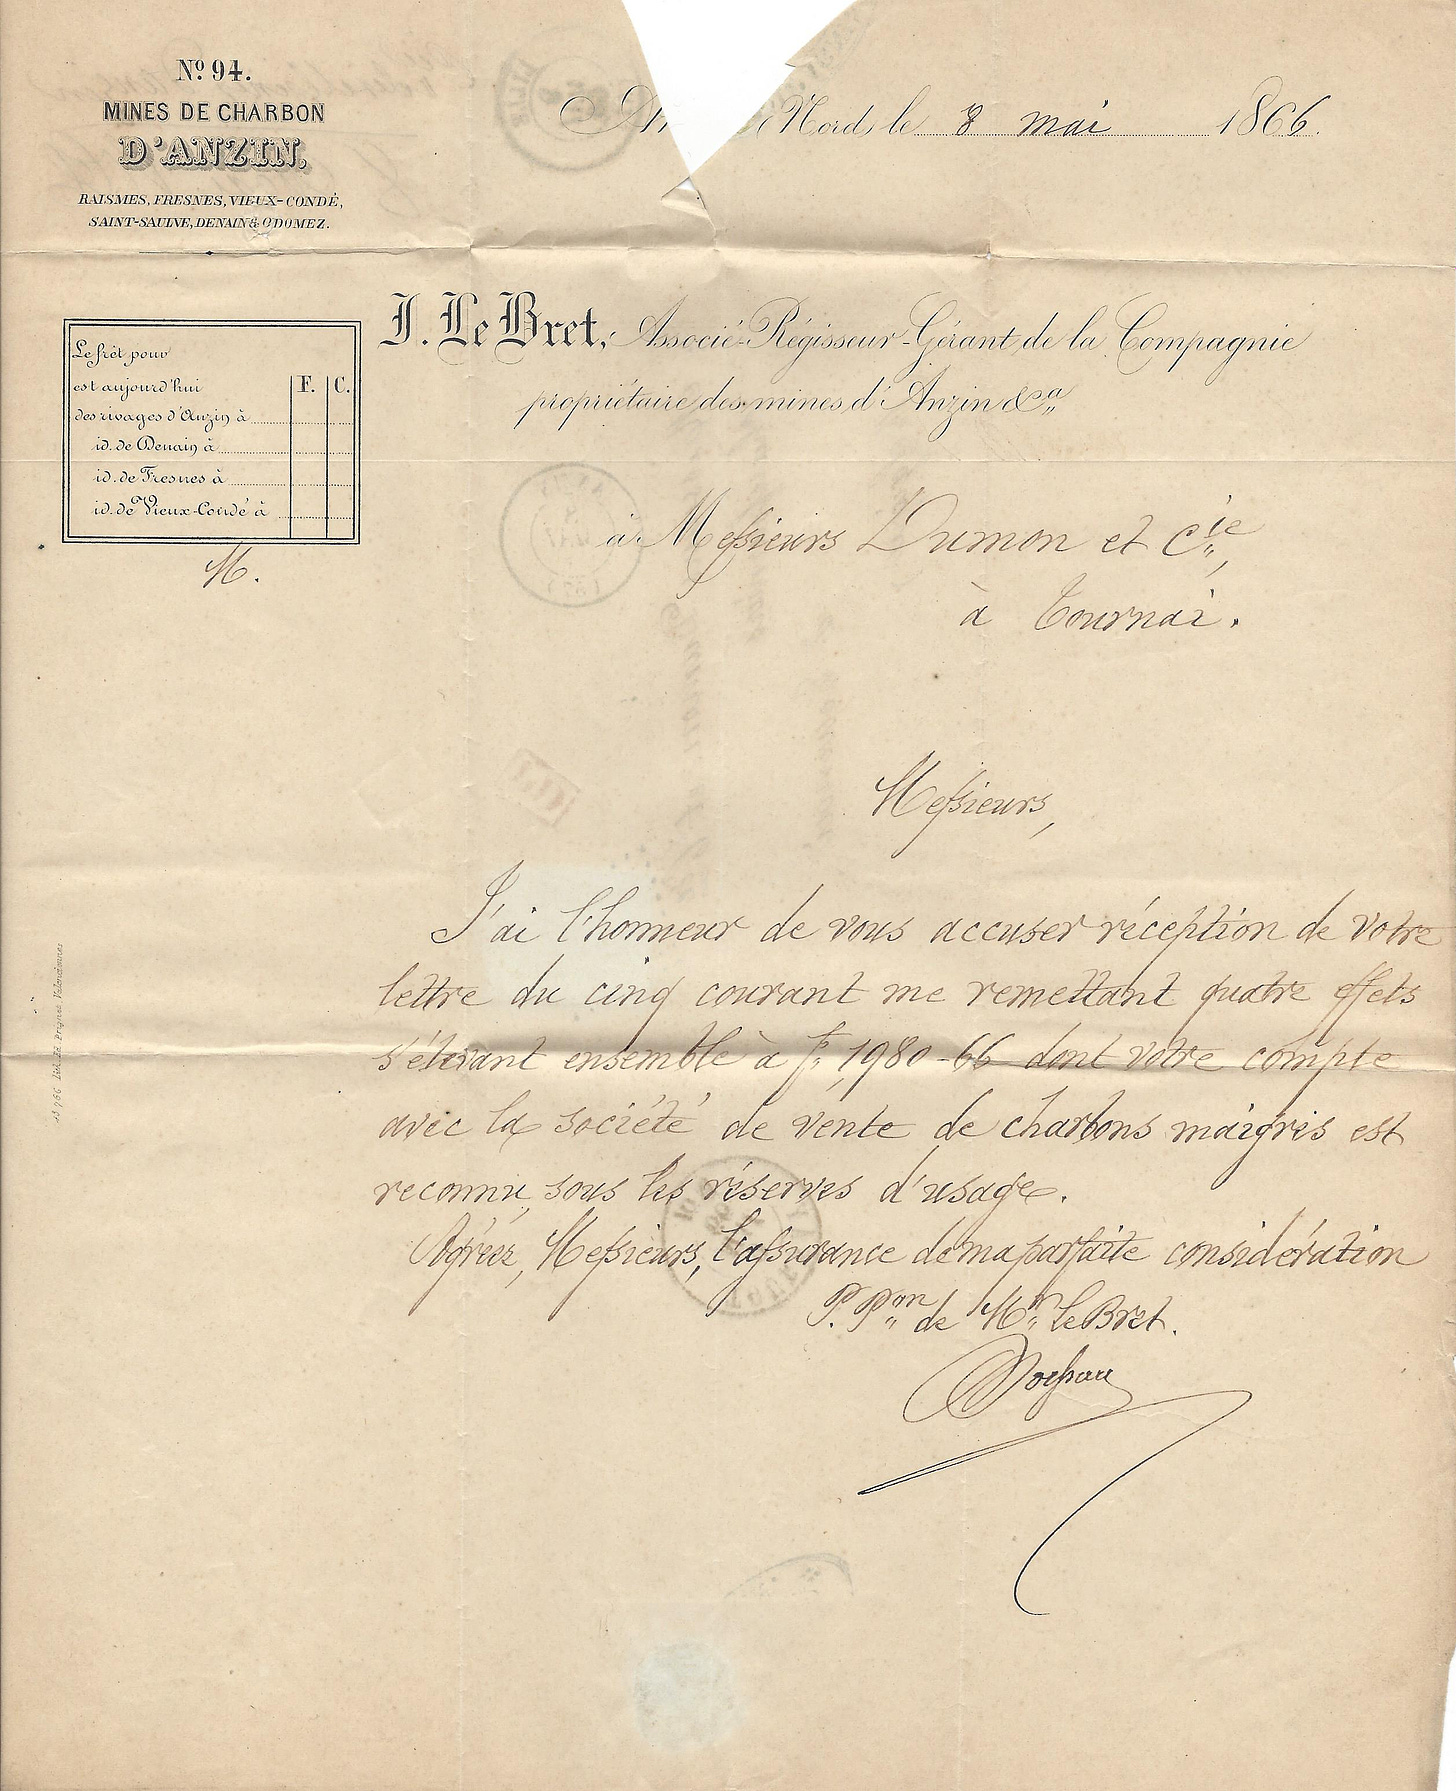 content of the 1866 business letter